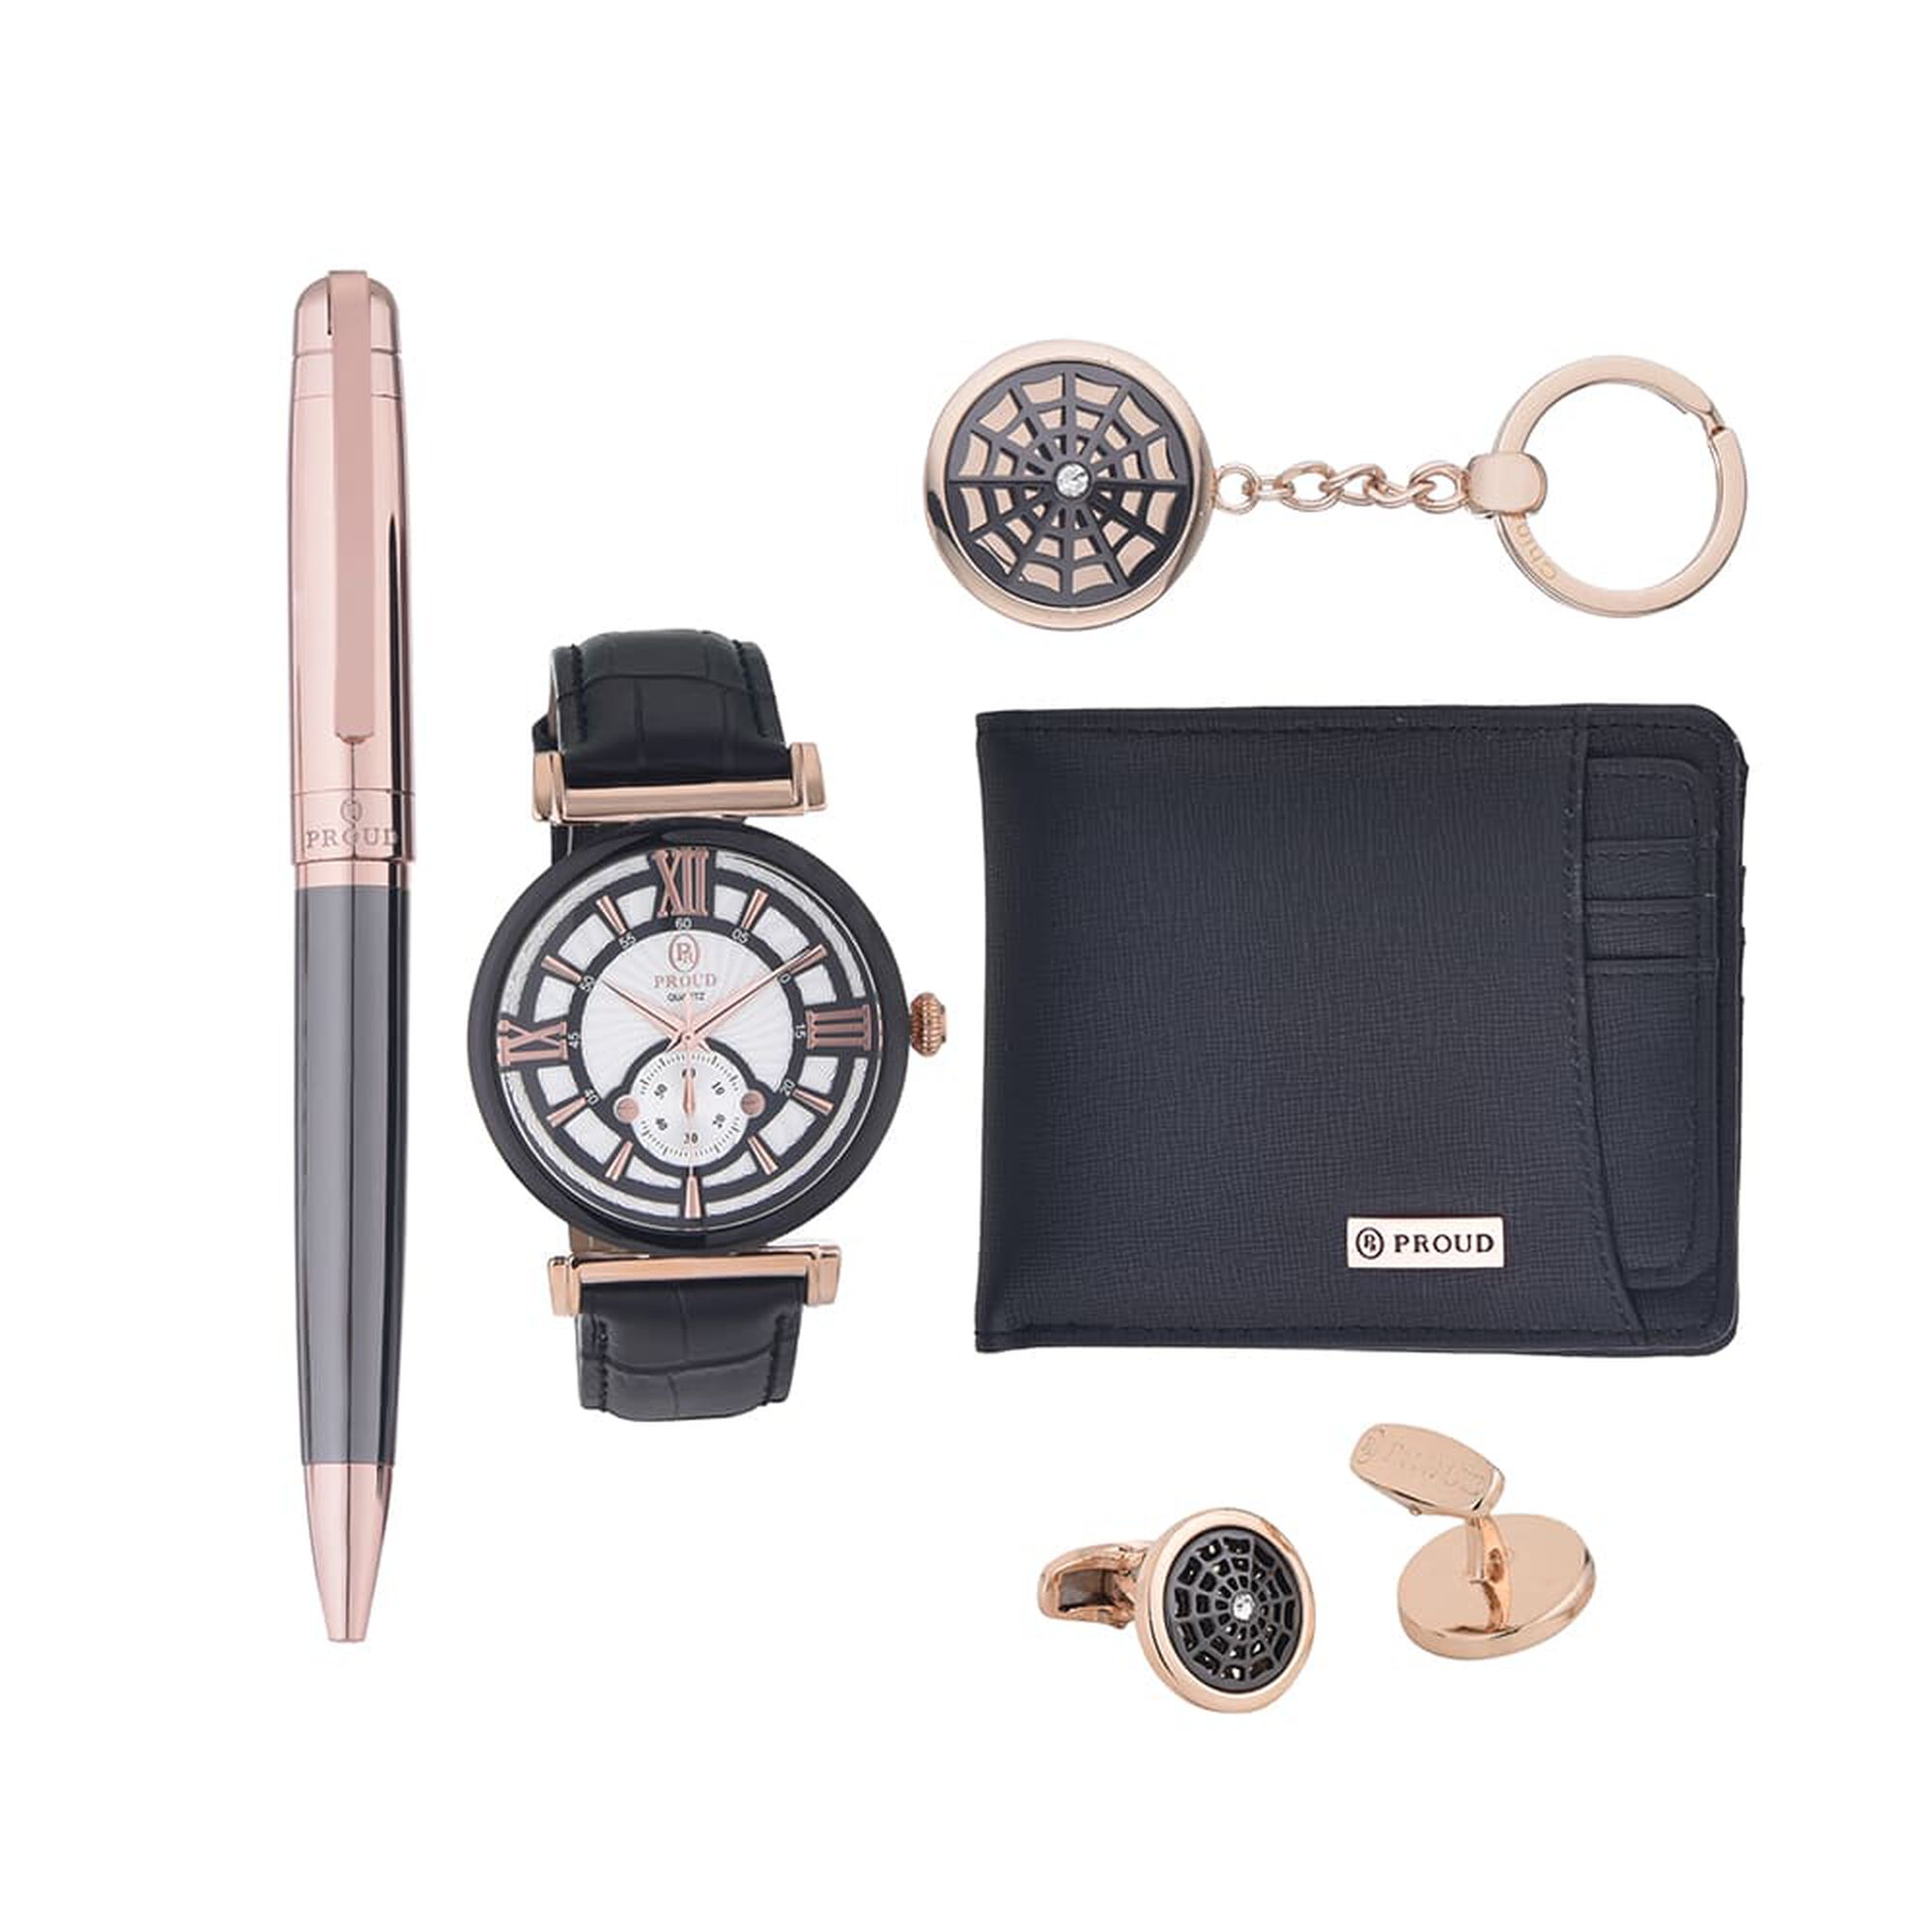 Proud accessories giftset rosegold 5 pcs.